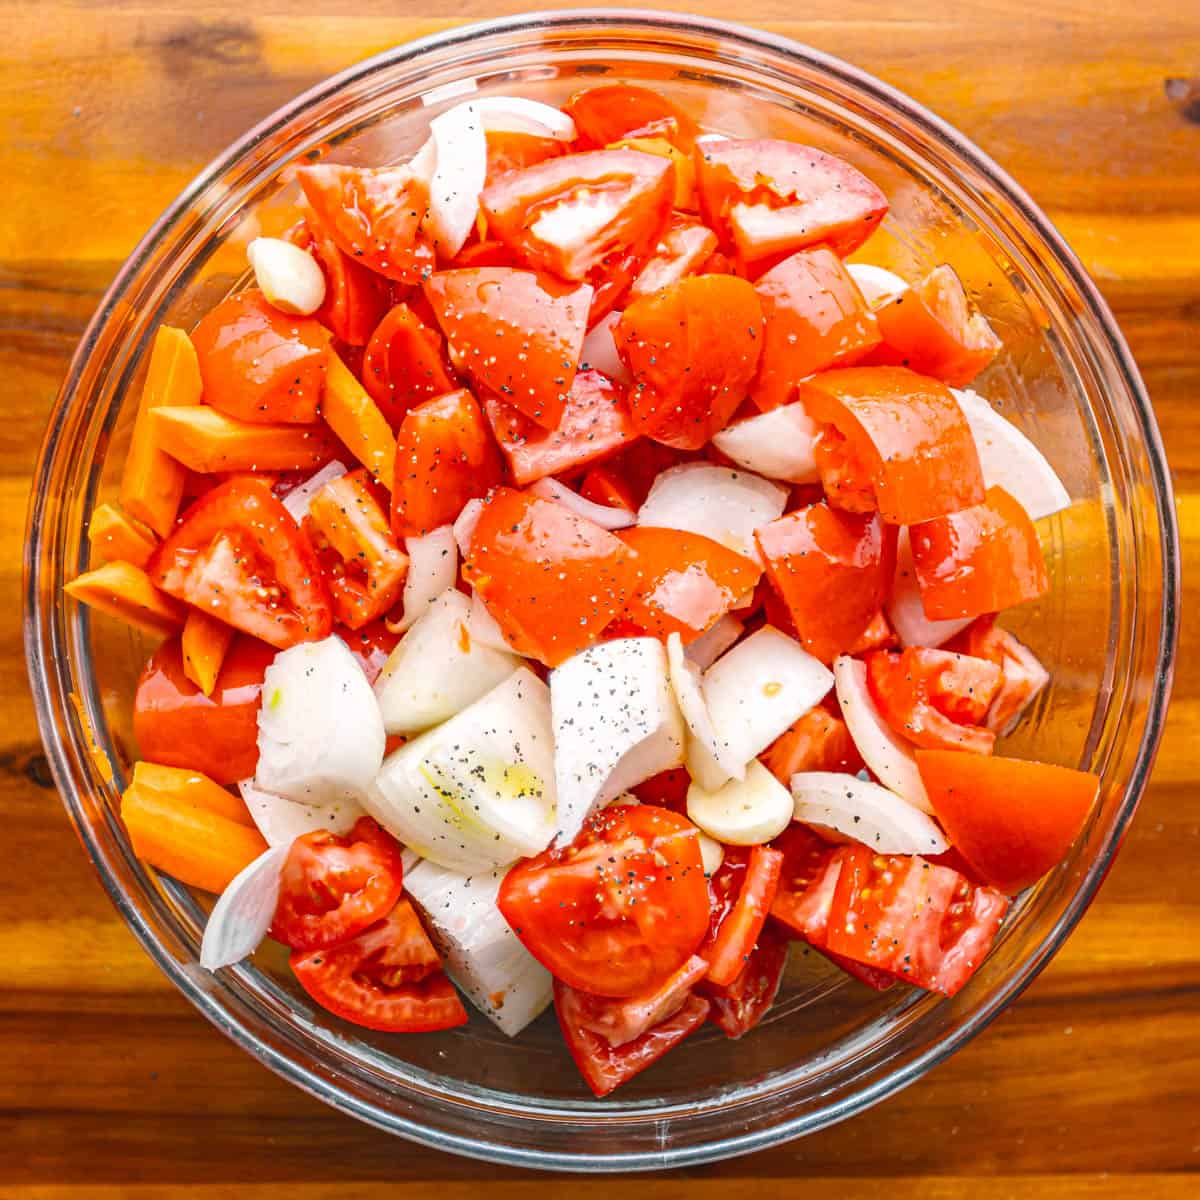 Toss garlic, tomatoes, onion, and carrot in olive oil, salt, and black pepper.